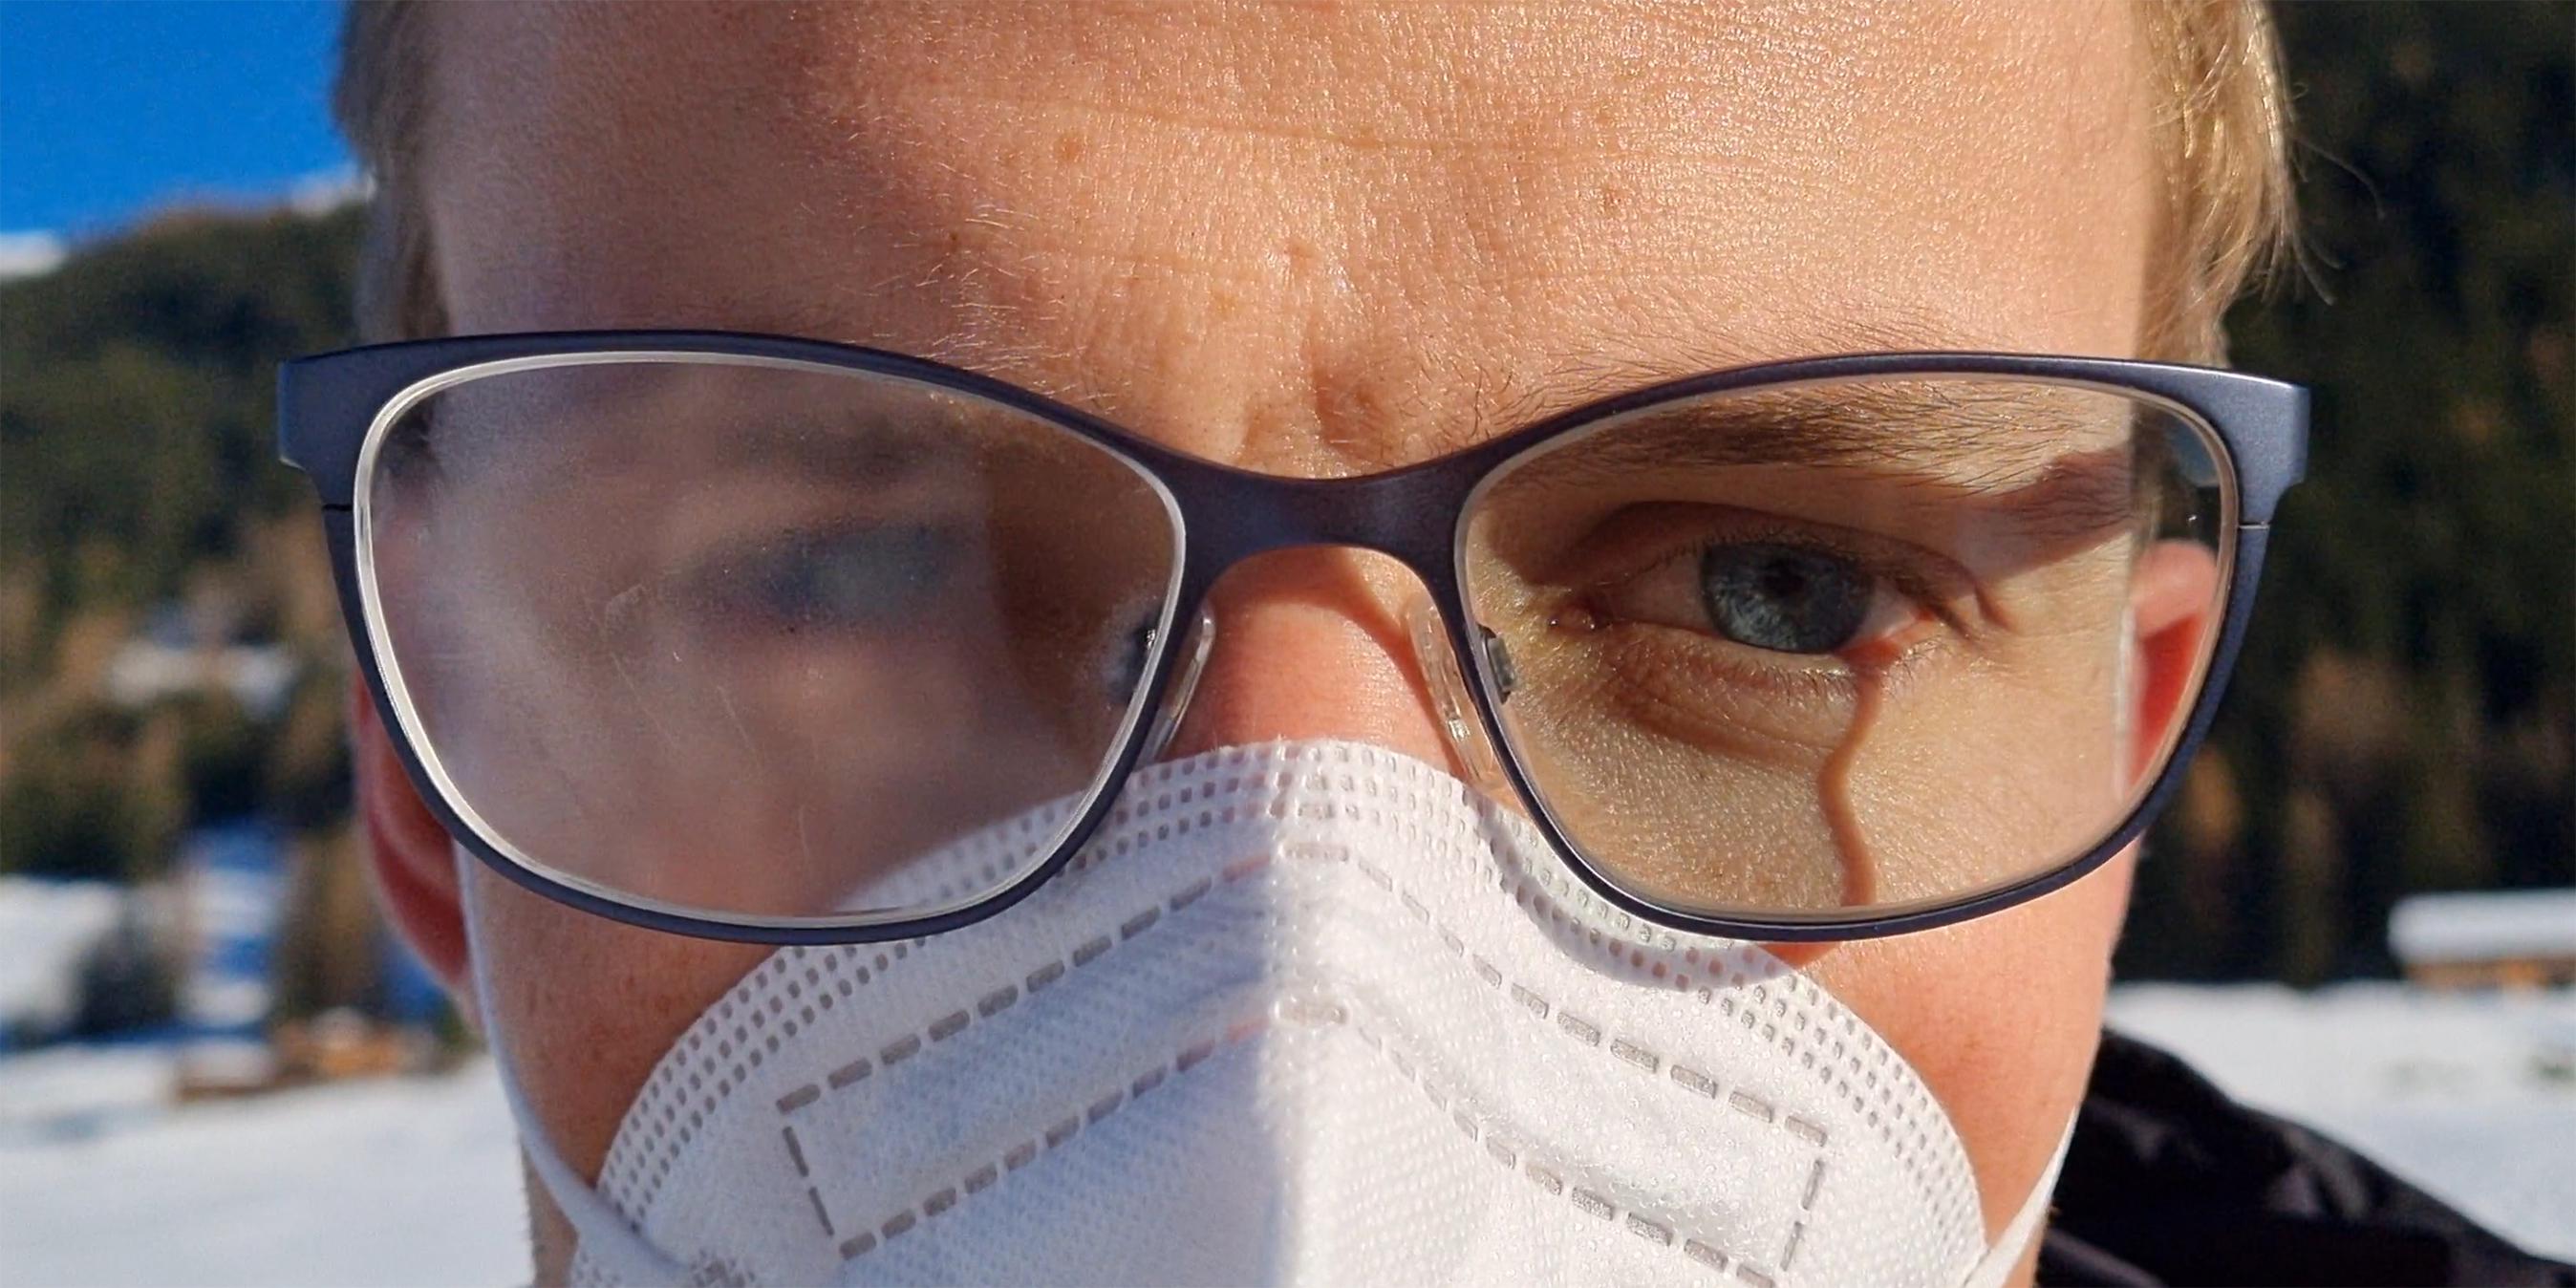 Close-up of man's face. He's wearing a FFP2 mask and glasses in winter. His right eyeglass lens is fogged up.